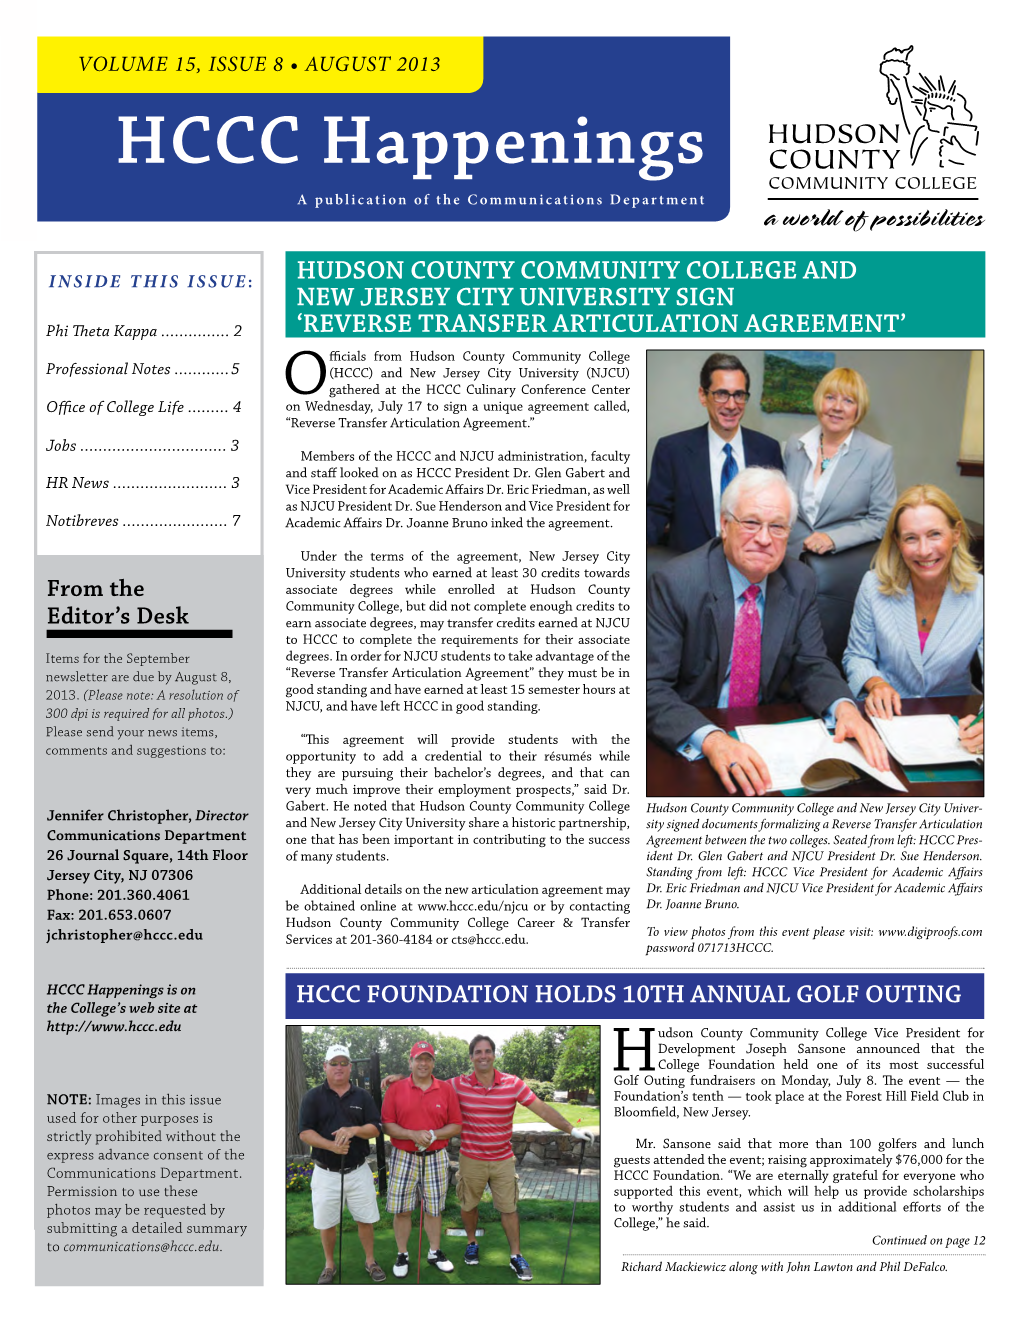 AUGUST 2013 HCCC Happenings a Publication of the Communications Department